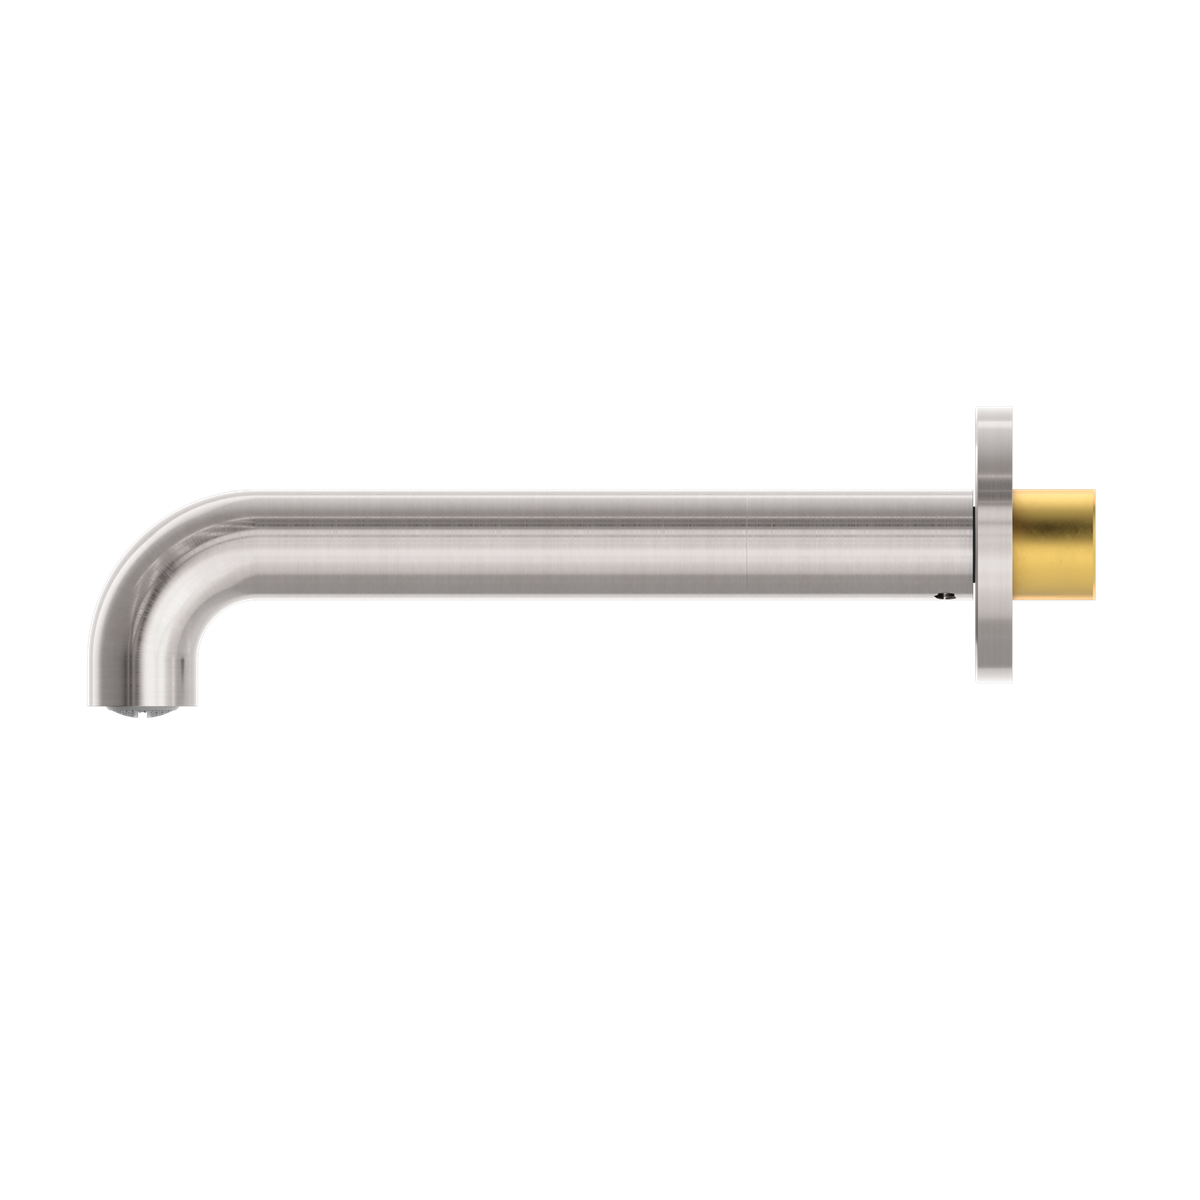 NERO MECCA BASIN/ BATH SPOUT BRUSHED NICKEL (AVAILABLE IN 120MM,160MM,185MM, 230MM AND 260MM)